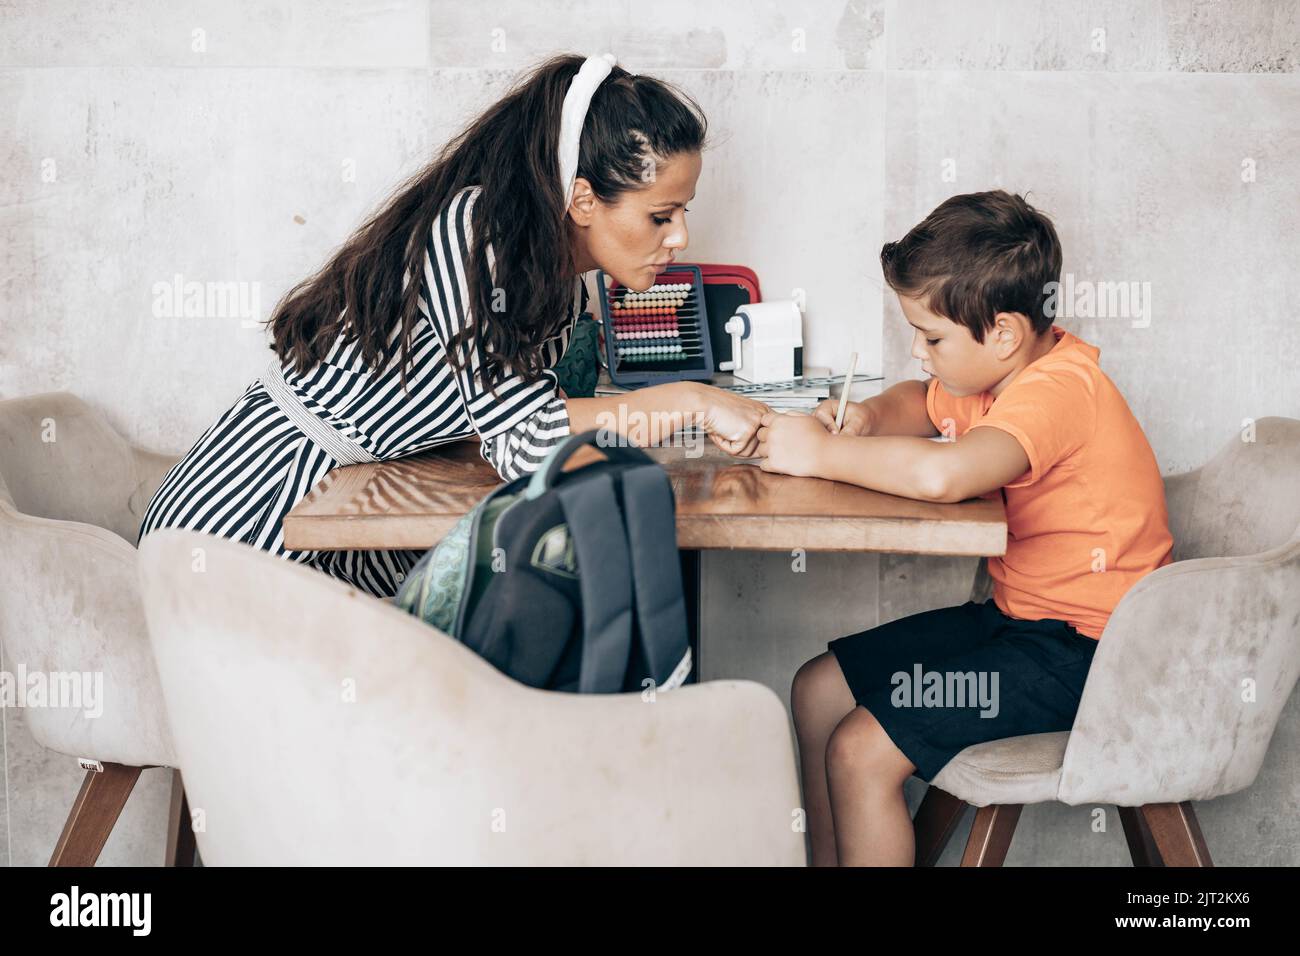 Little school boy doing homework with his mom helping him Stock Photo